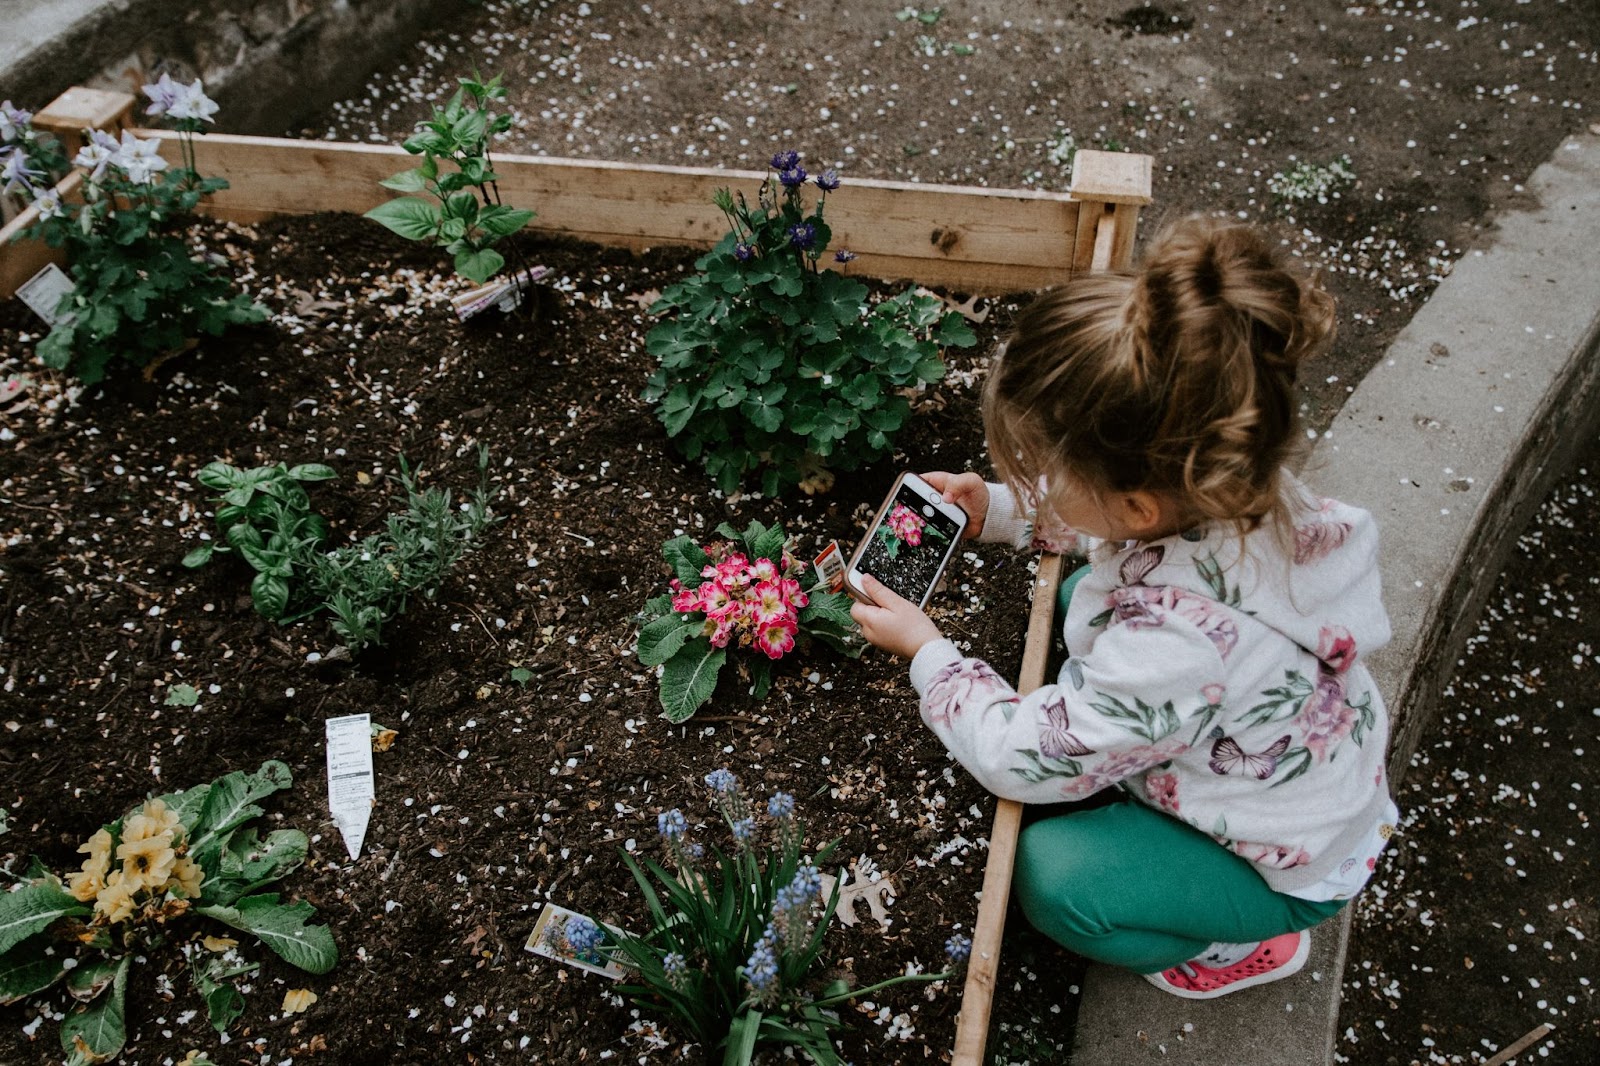 Little girl gardening and tending to a garden bed of flowers